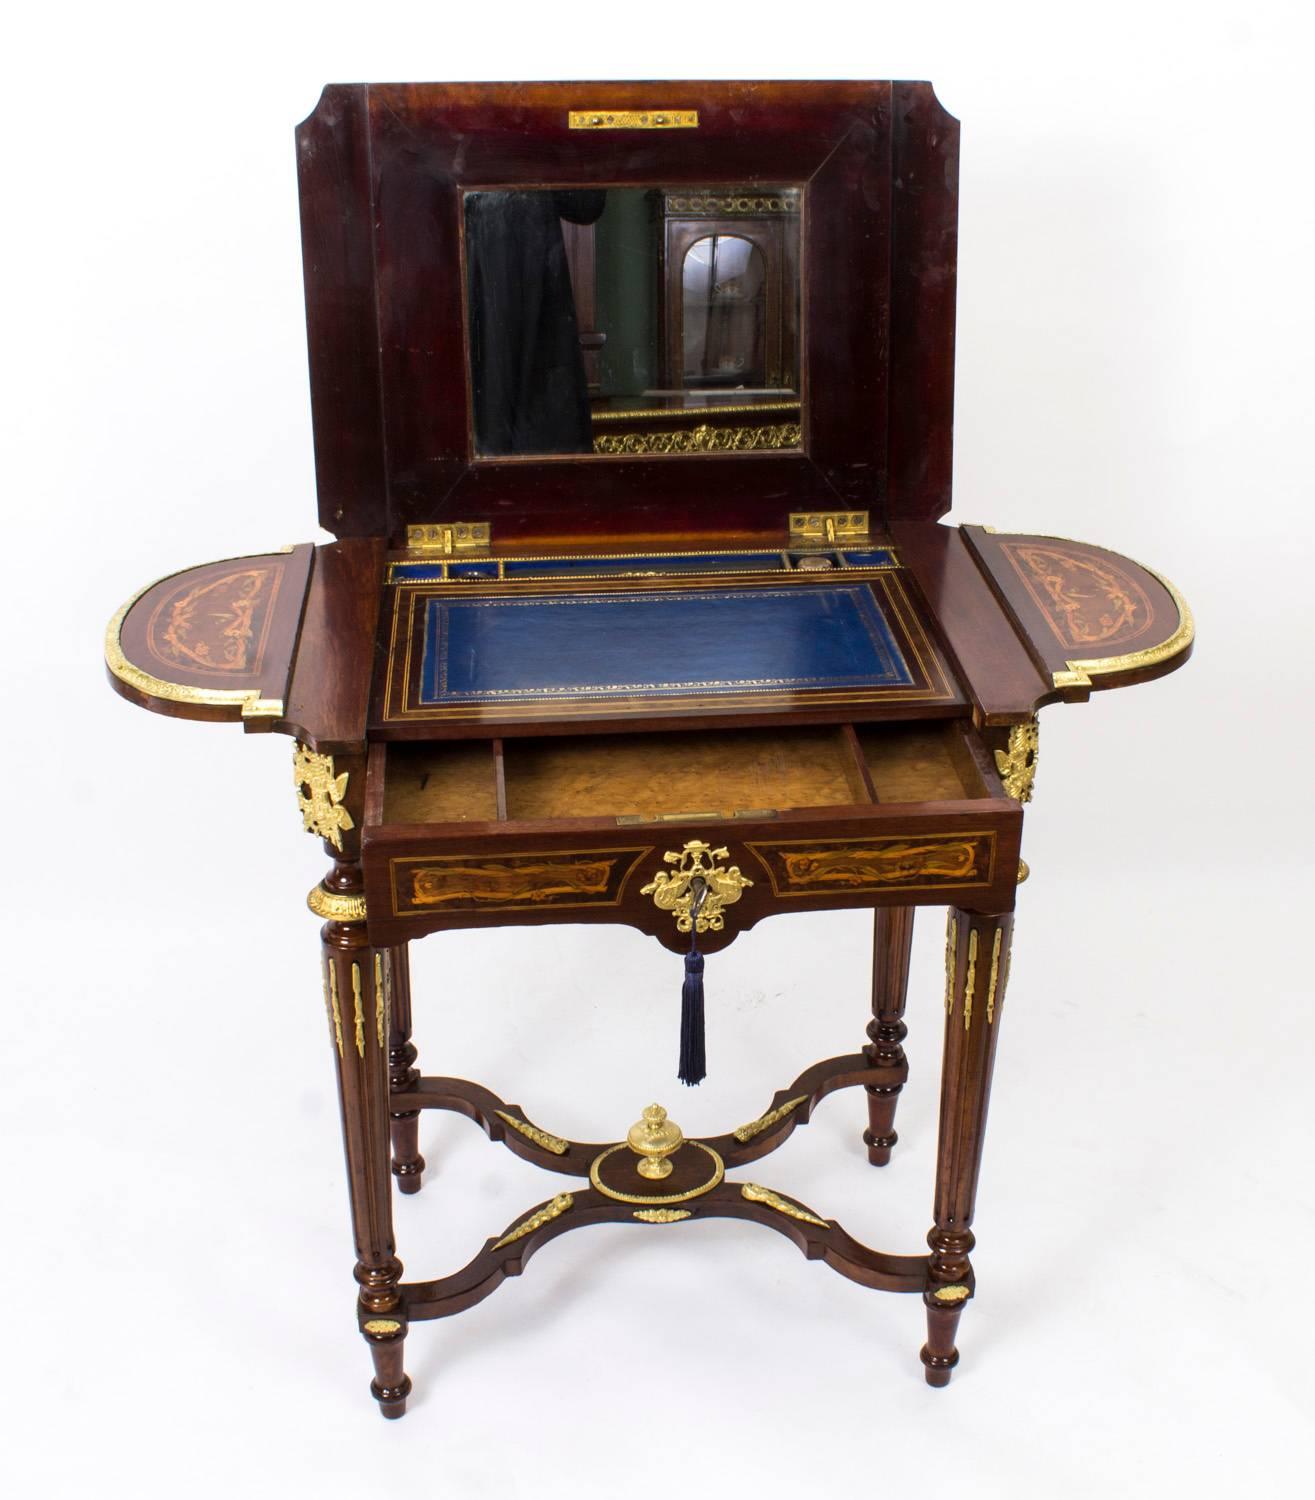 Marquetry Antique French Louis XV Revival Poudreuse Writing Table, circa 1860